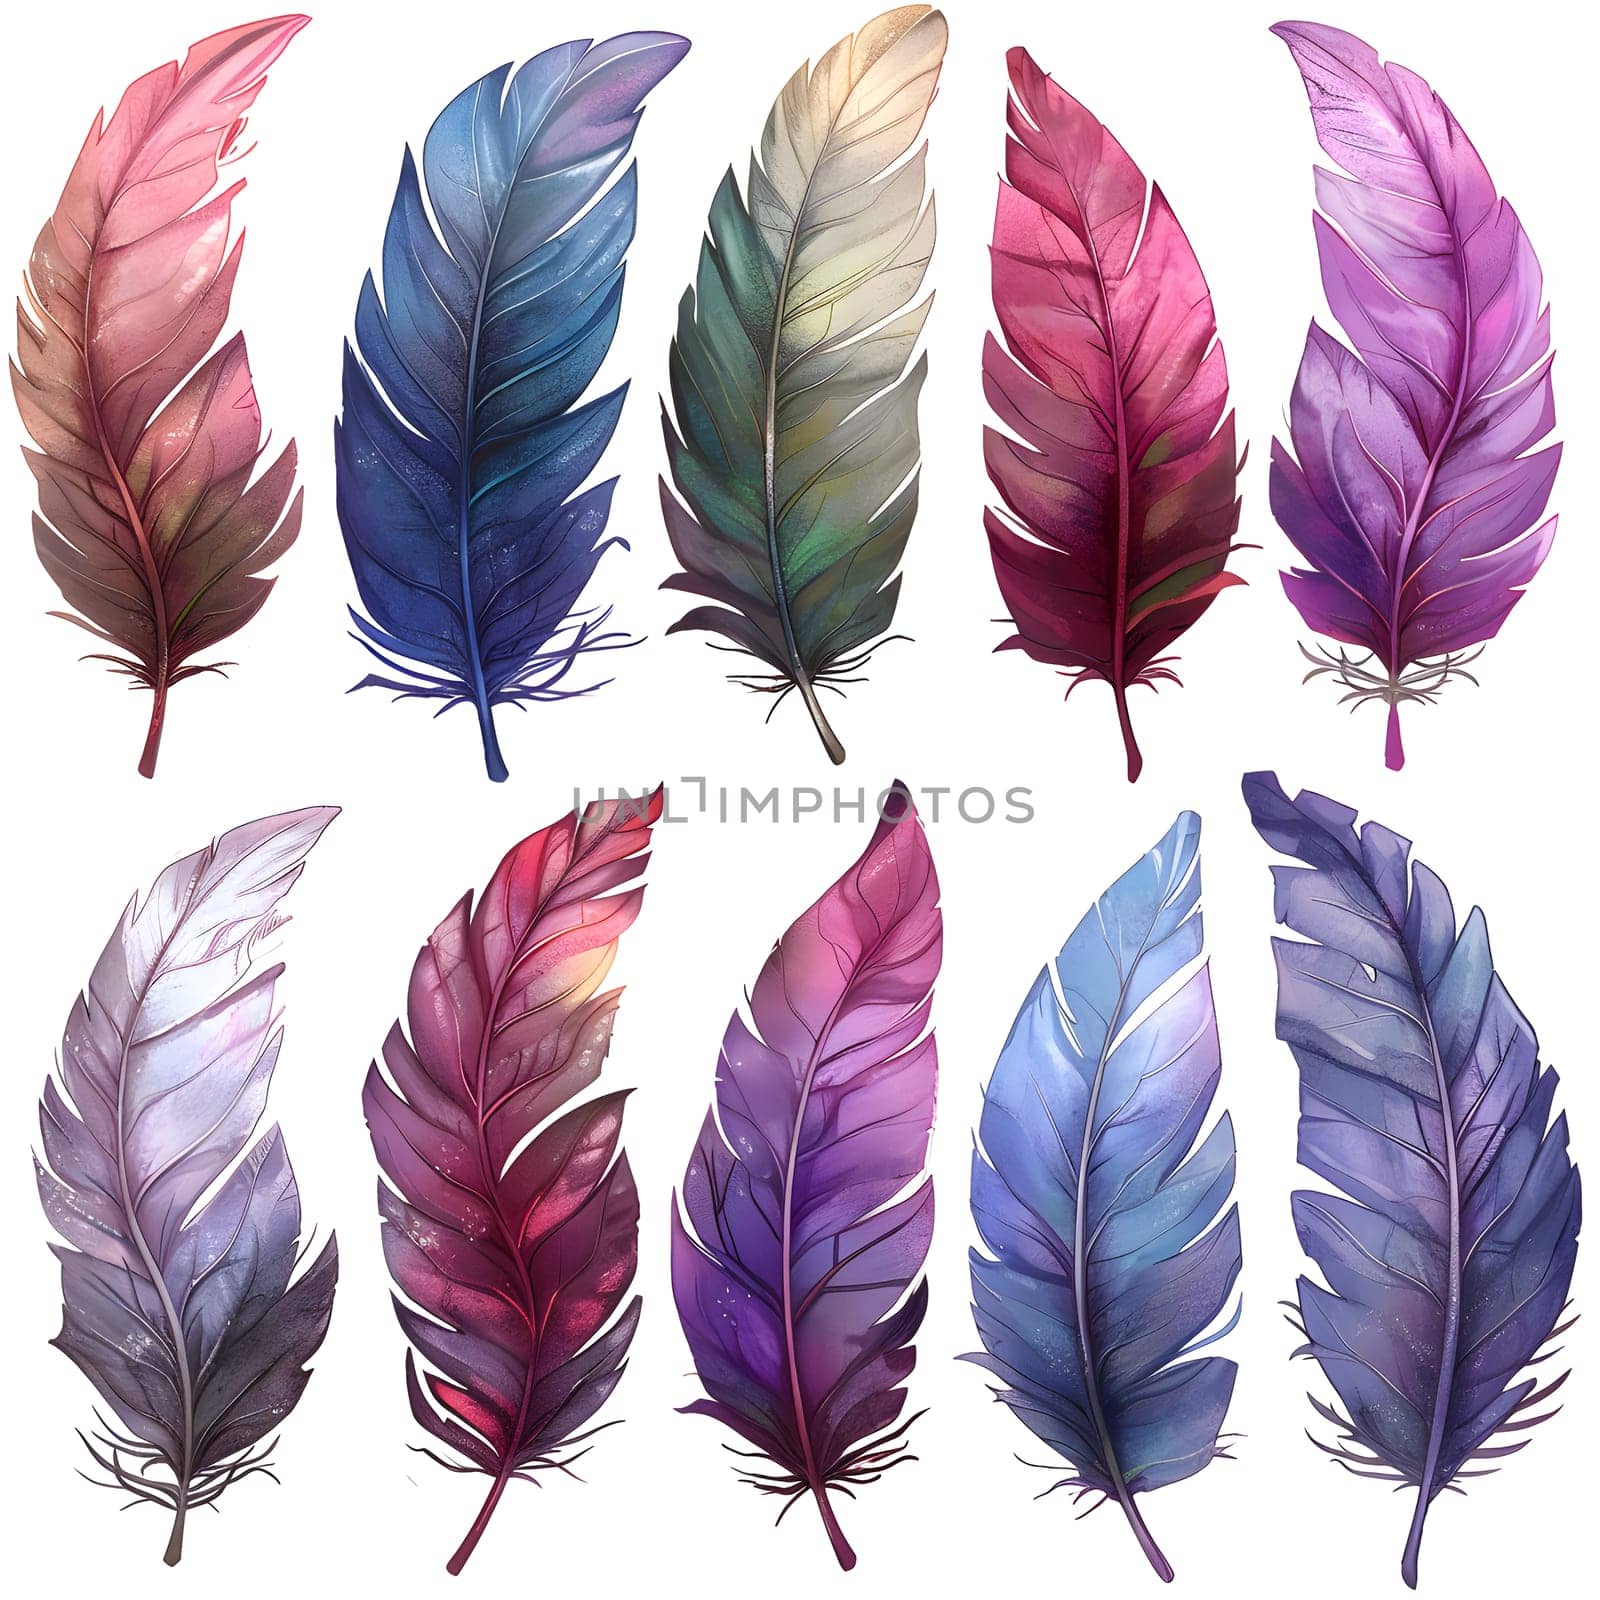 A vibrant mix of natural materials like feathers, petals, and twigs in striking colors such as violet, magenta, and electric blue, creating a beautiful art piece on a white background